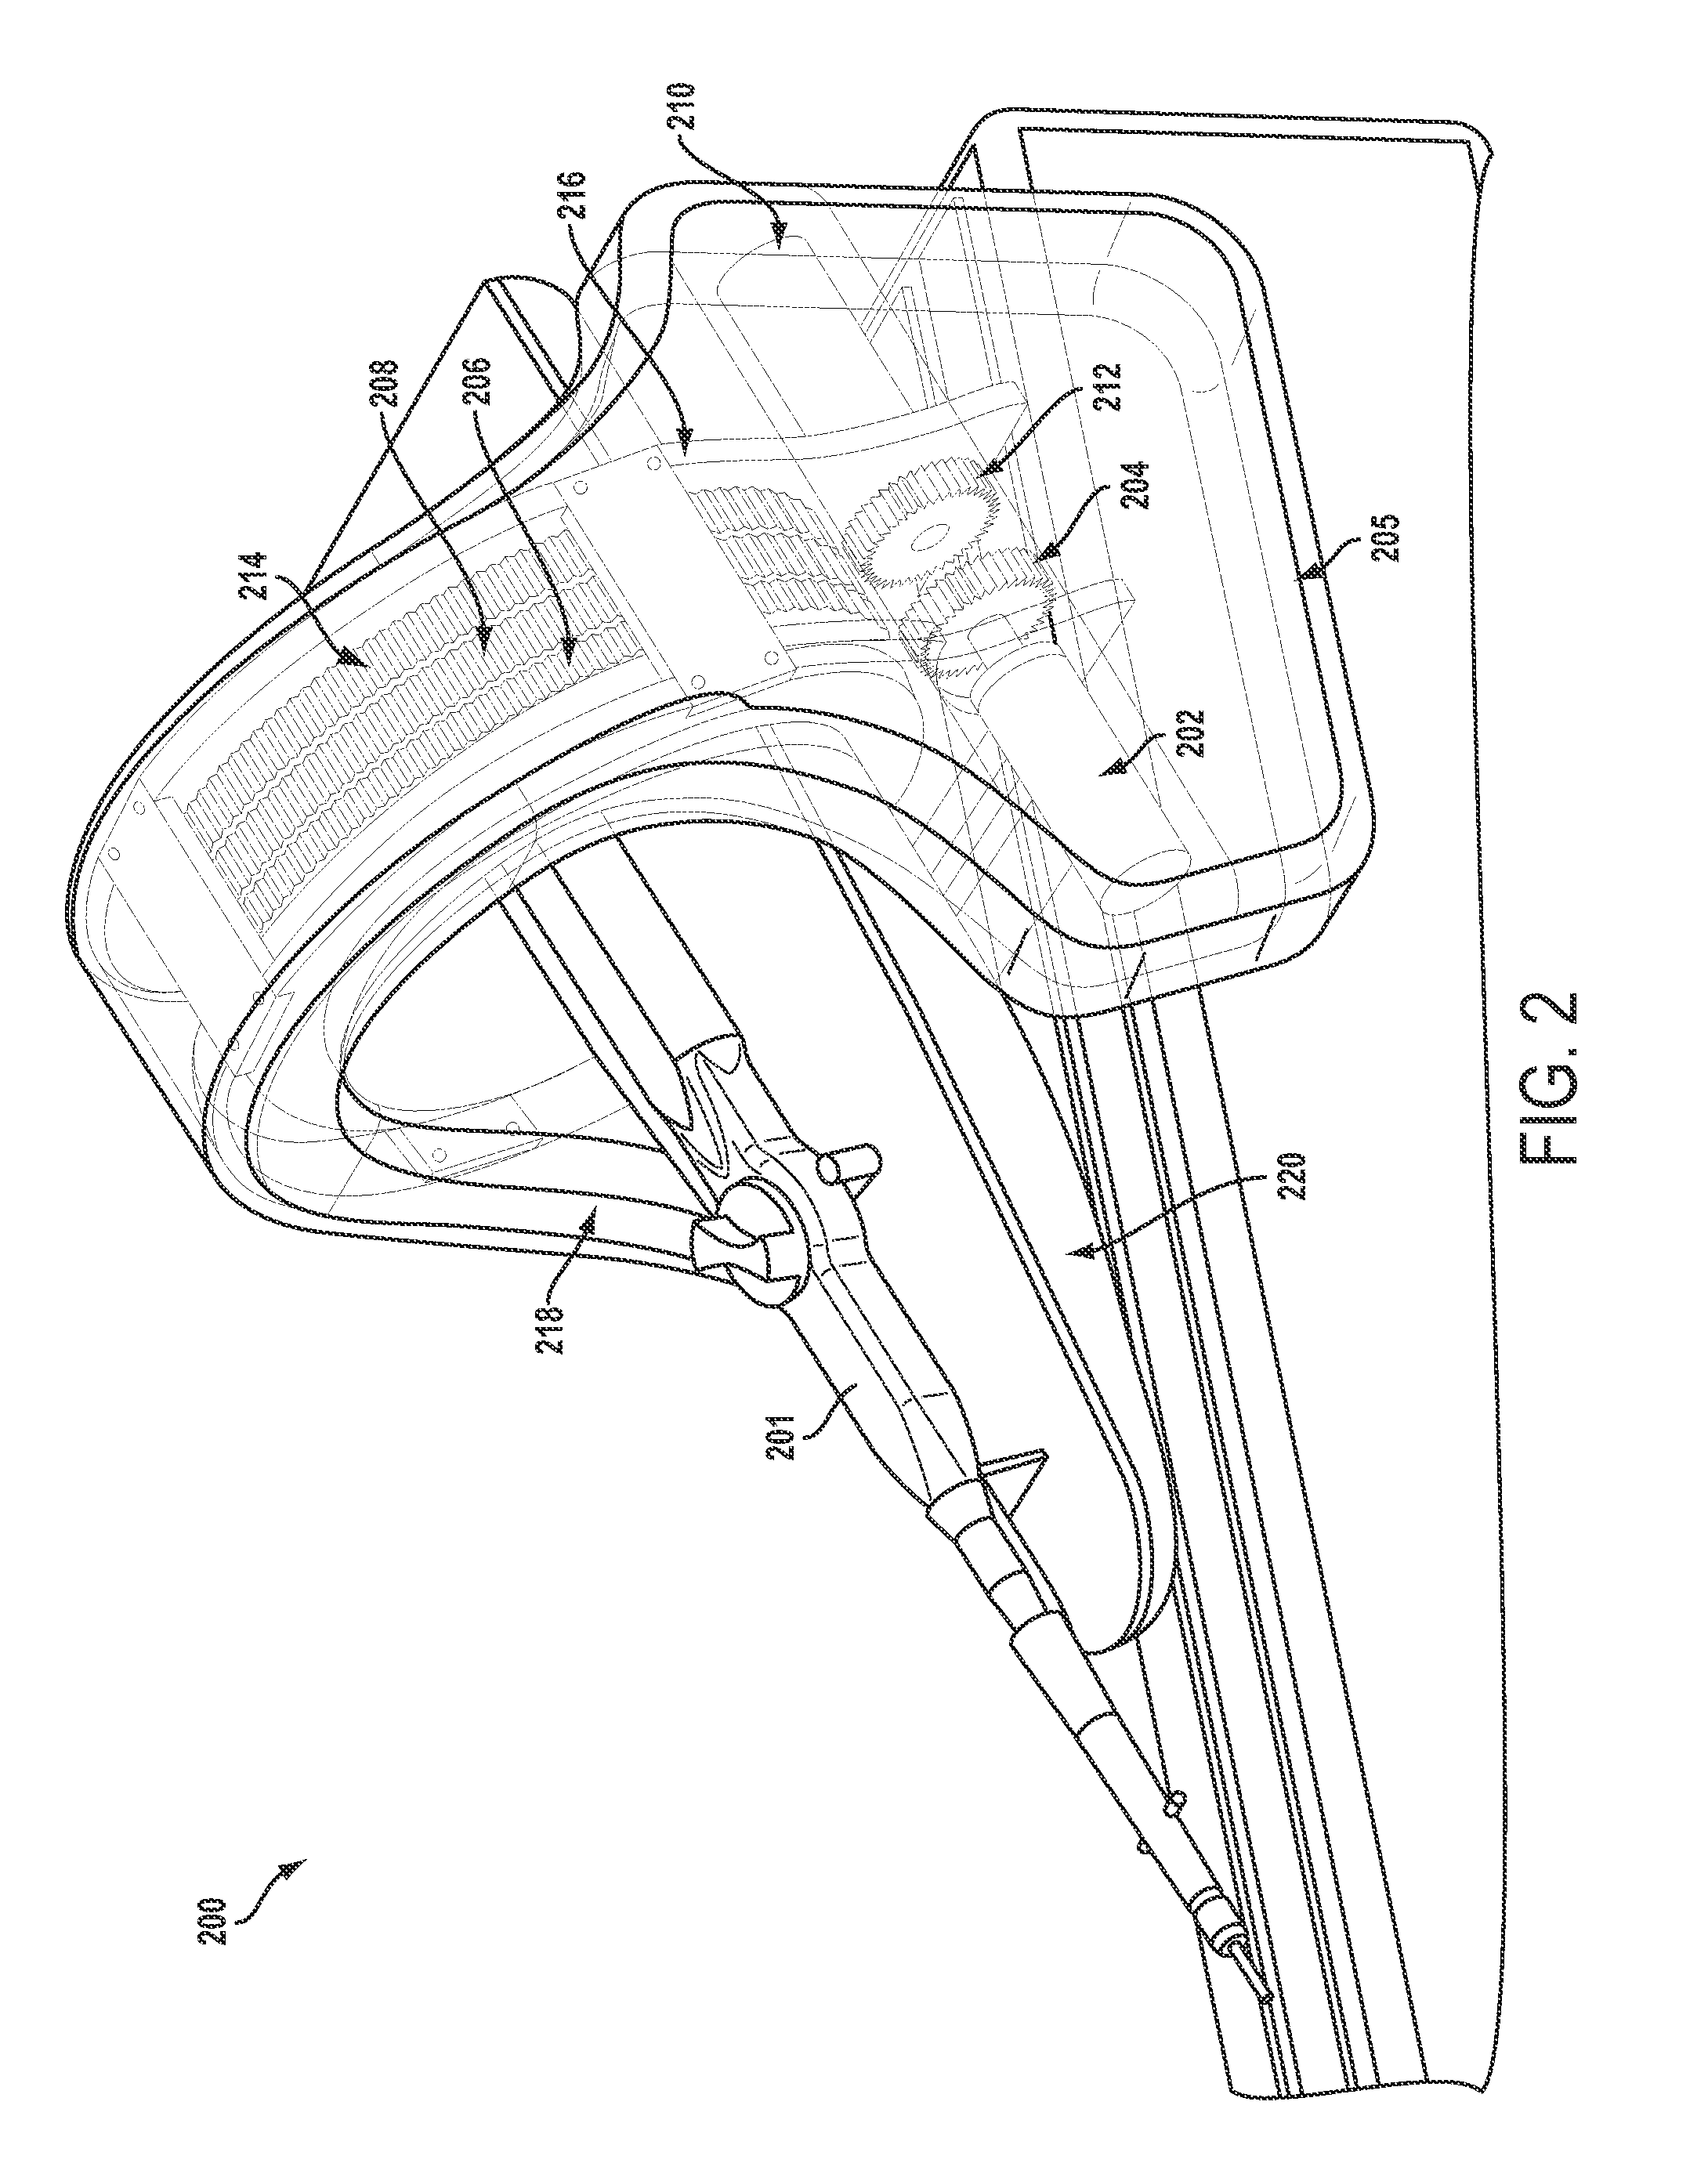 Remote Catheter Positioning System with Hoop Drive Assembly